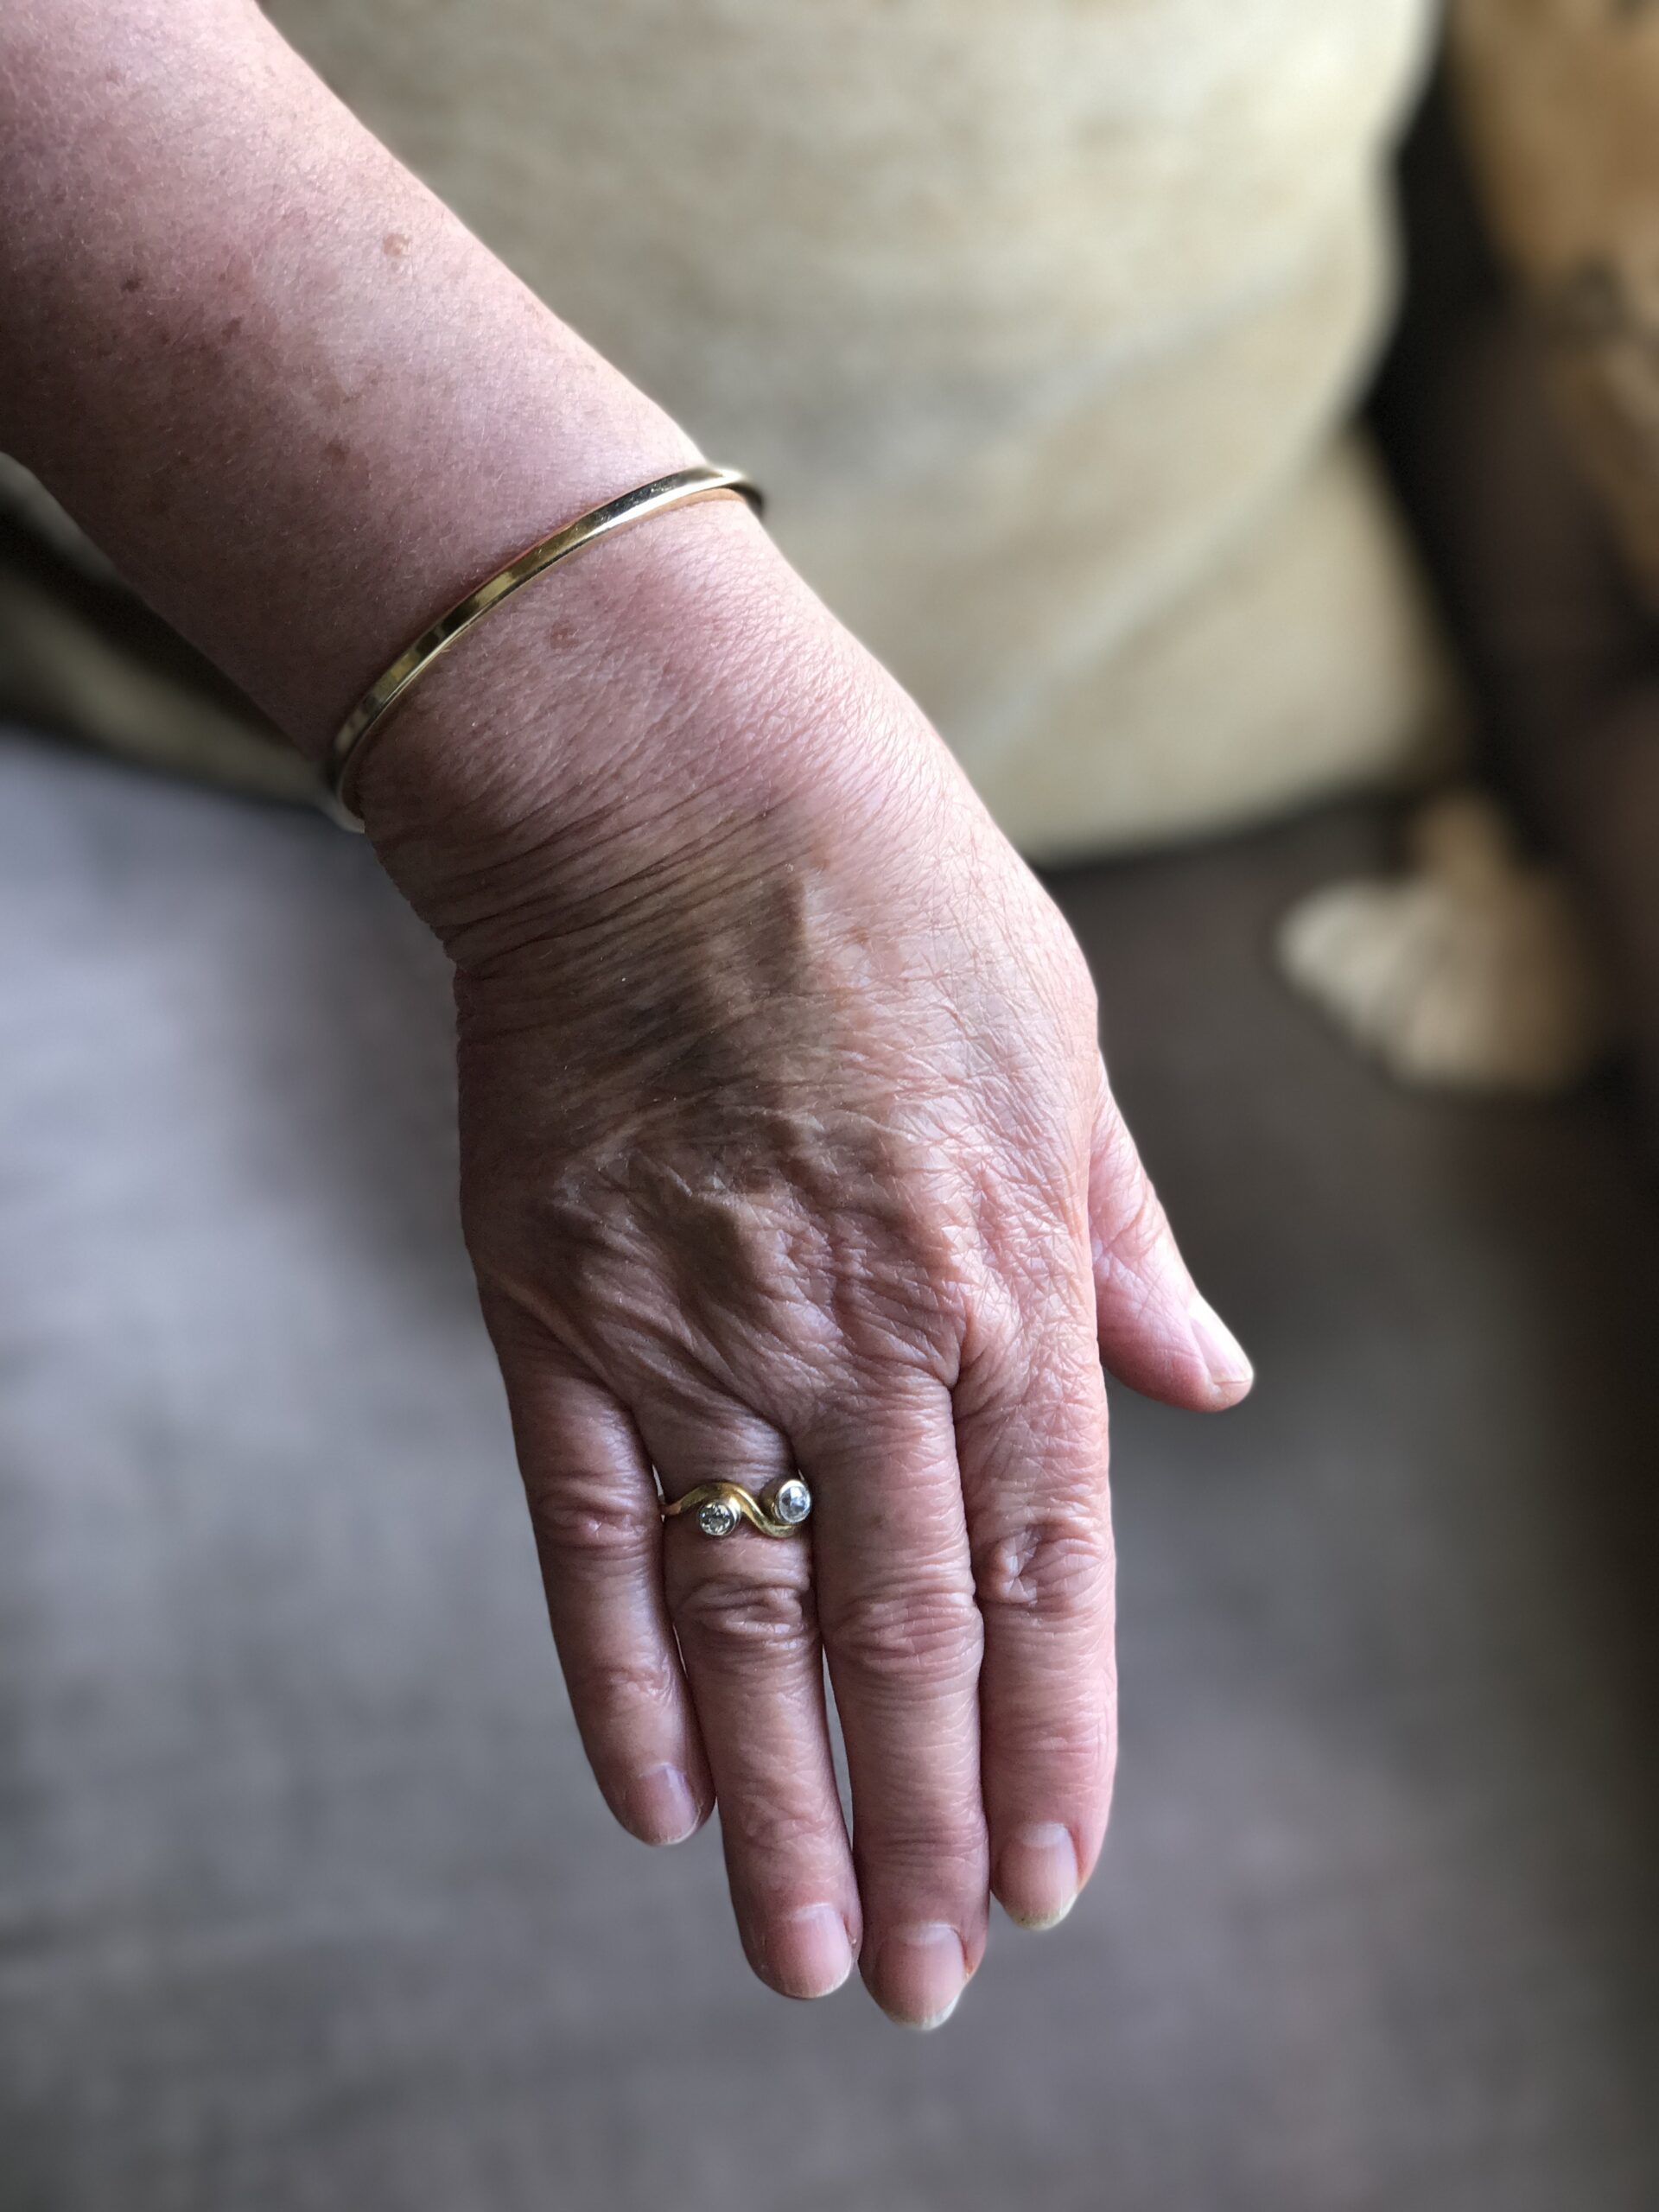 A mature white woman's right hand, back upwards with fingers straight out and closed, wearing a gold ring with two diamonds